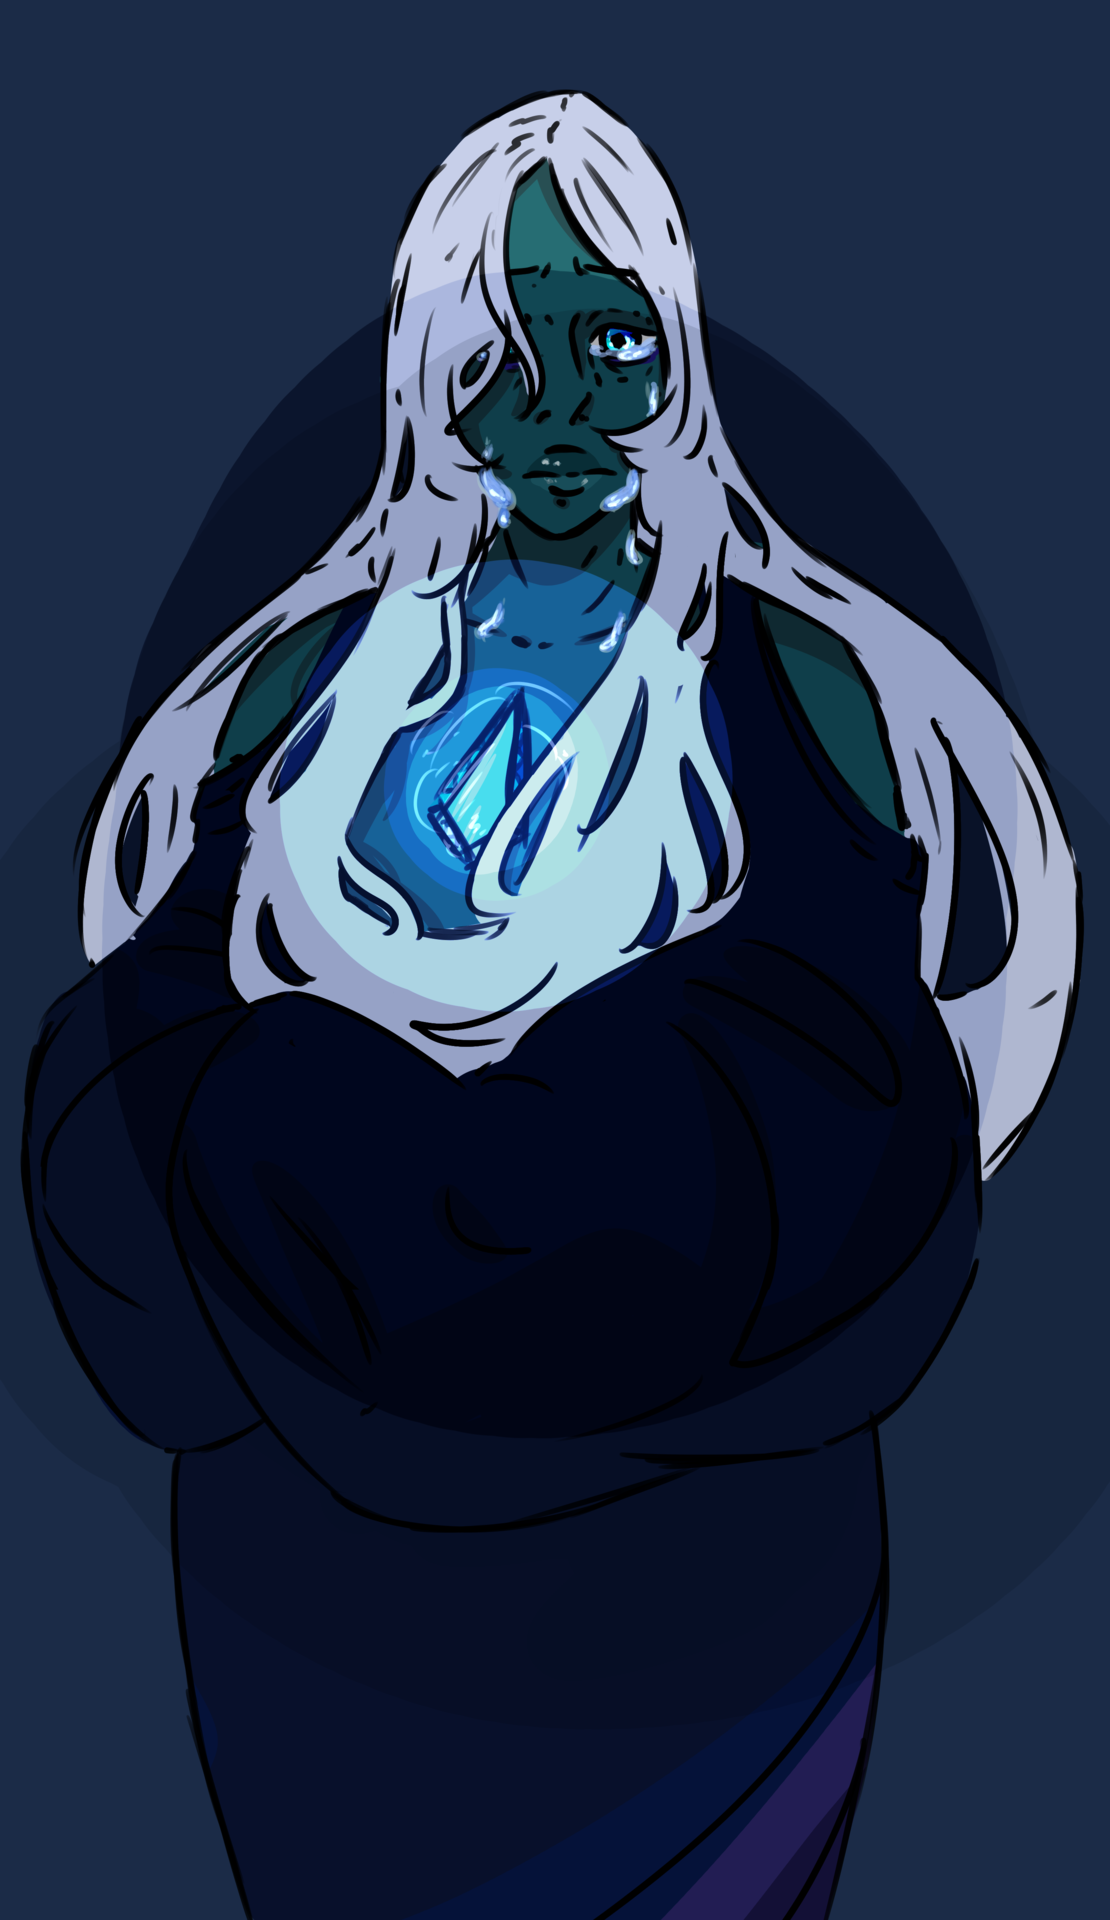 So I did end up doing another Blue diamond drawing. The line work is rather sloppy, but I wanted it to look that way for my wallpaper.